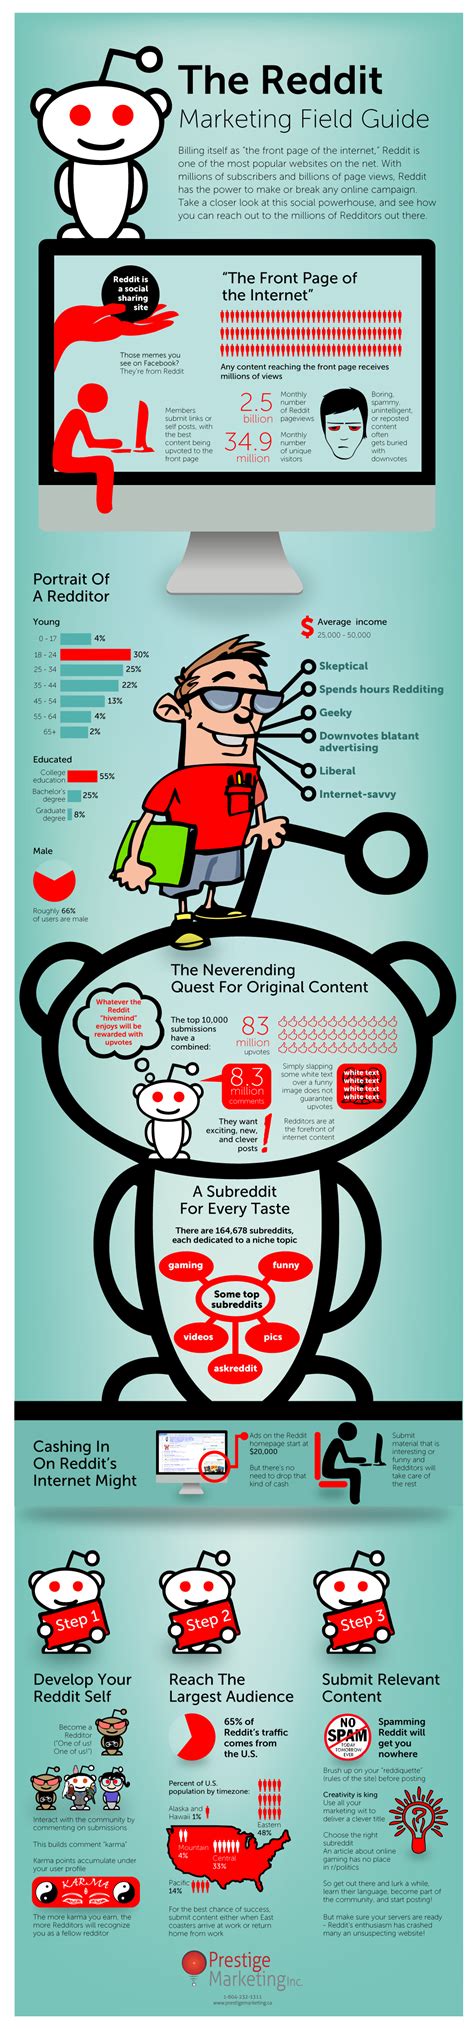 The Reddit Marketing Field Guide Infographic